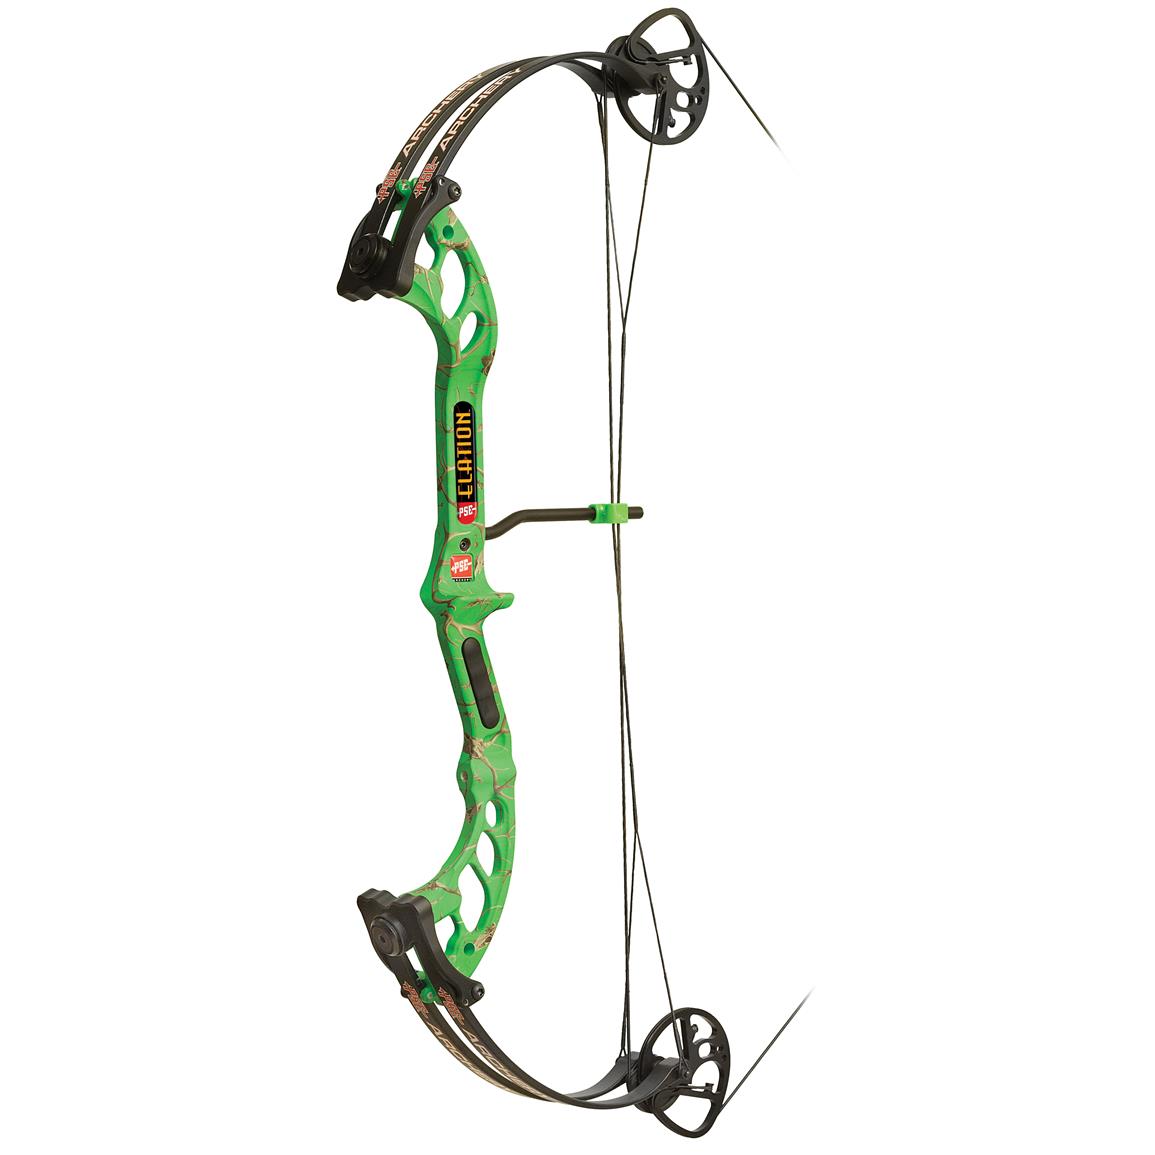 pse-elation-compound-bow-649277-bows-at-sportsman-s-guide